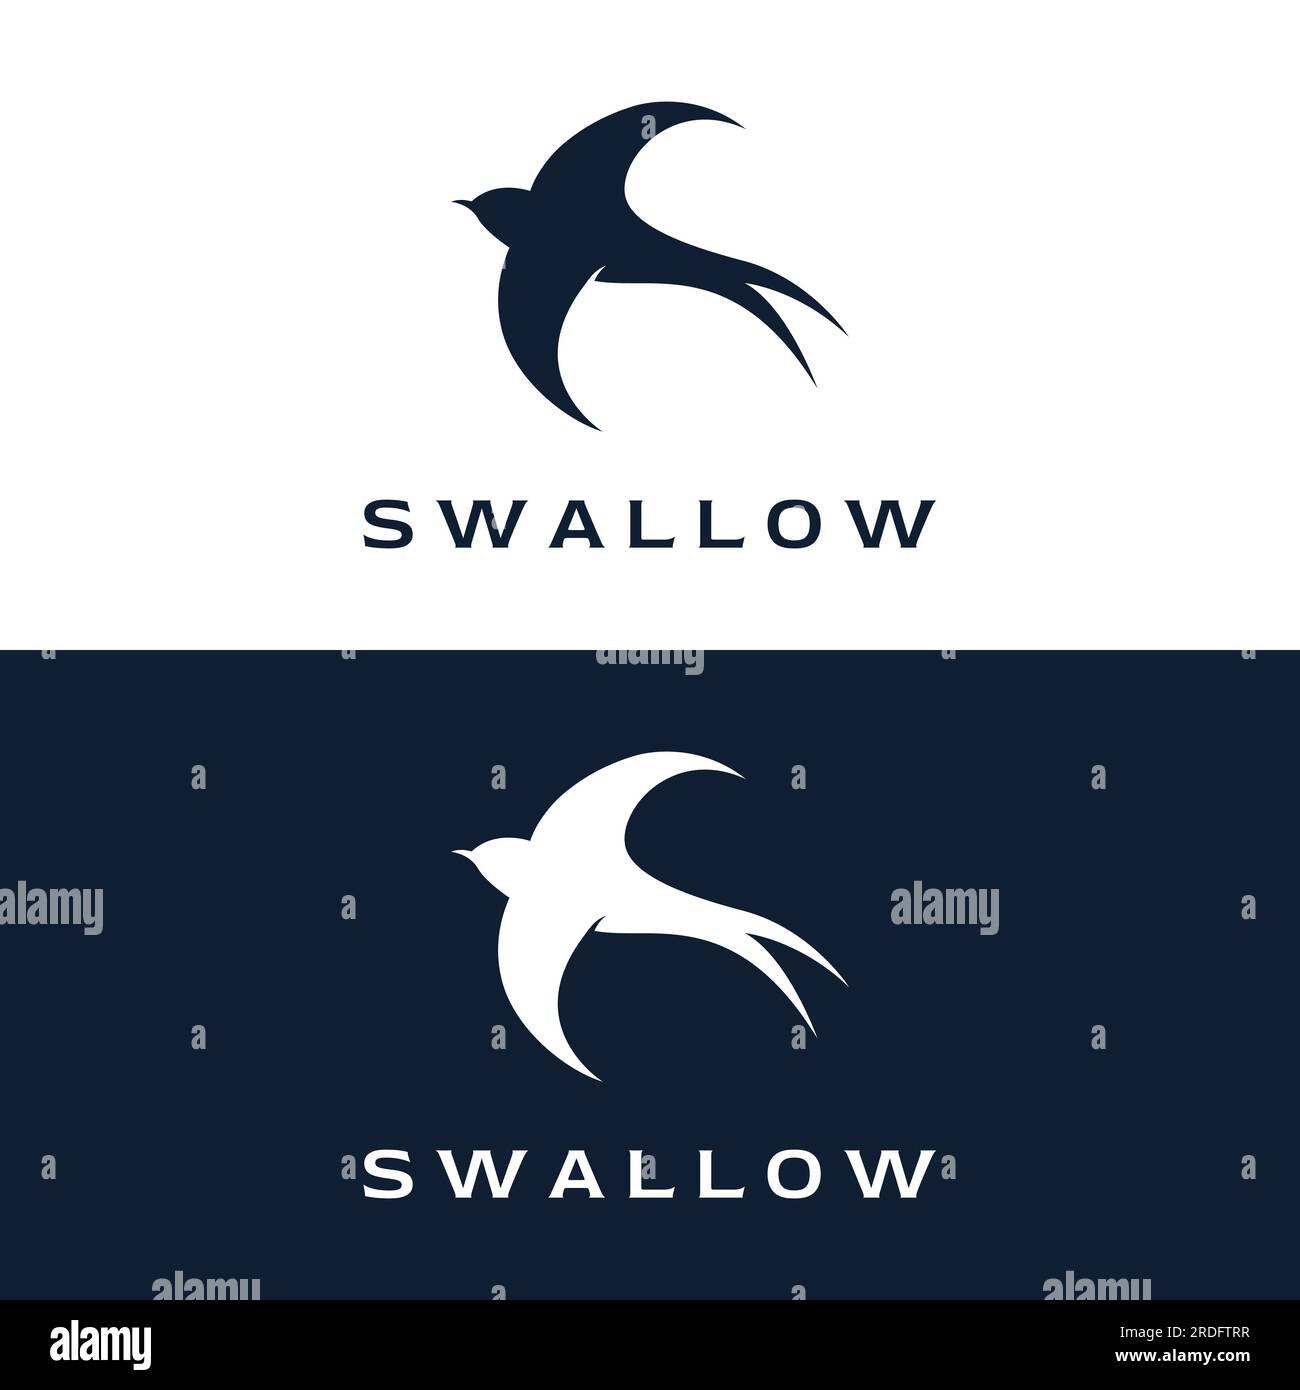 Simple logo design silhouette of a martin martlet swallow flying hovering. Stock Vector